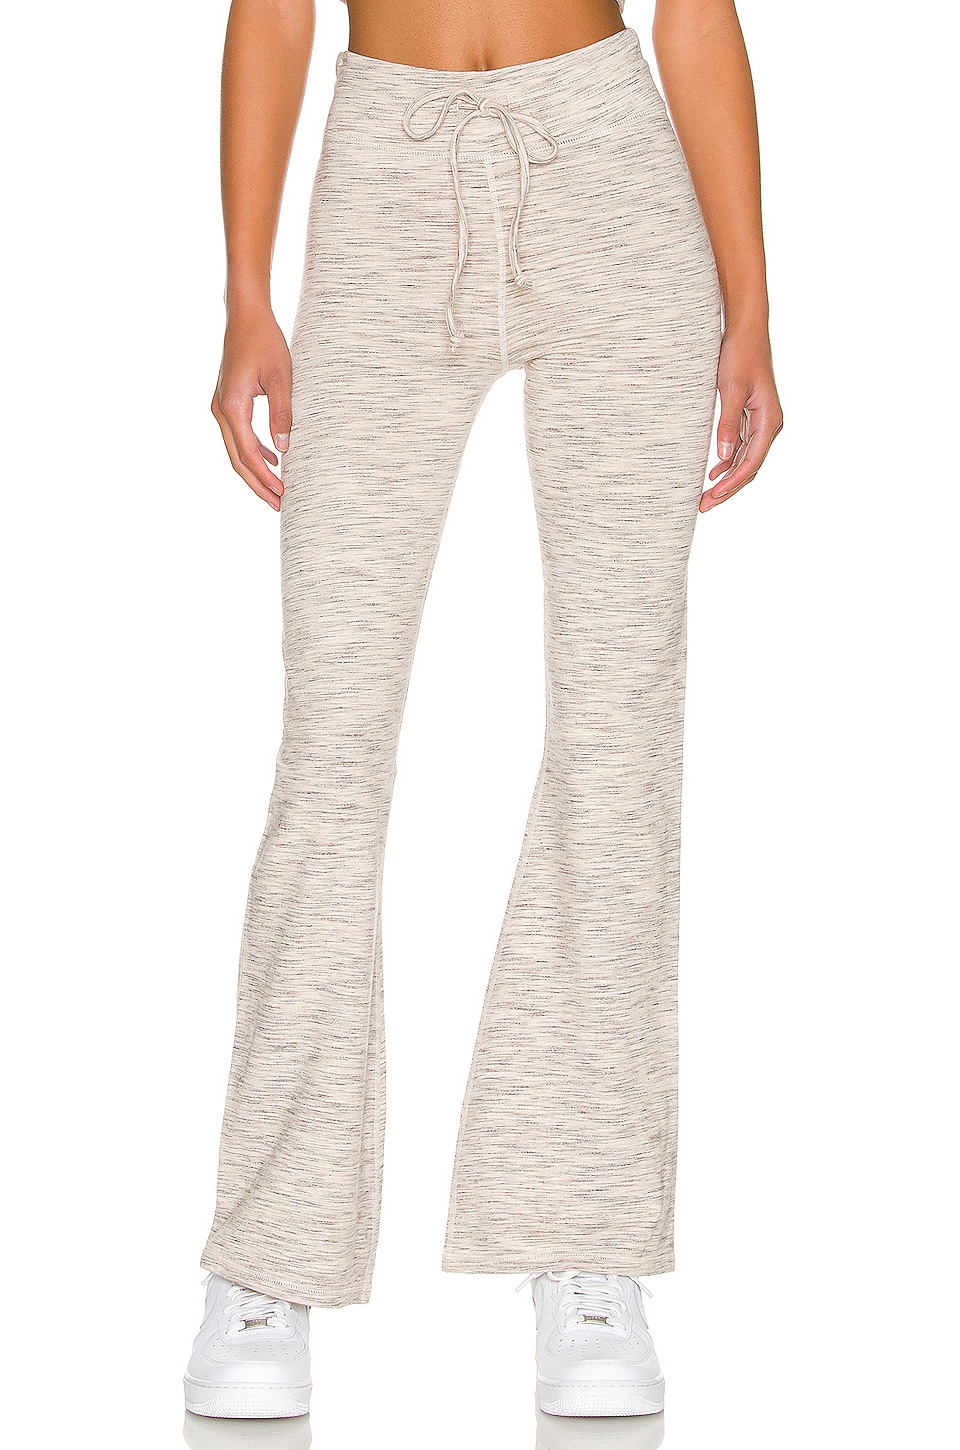 THE UPSIDE Lotus Milly Flare Pant Grey